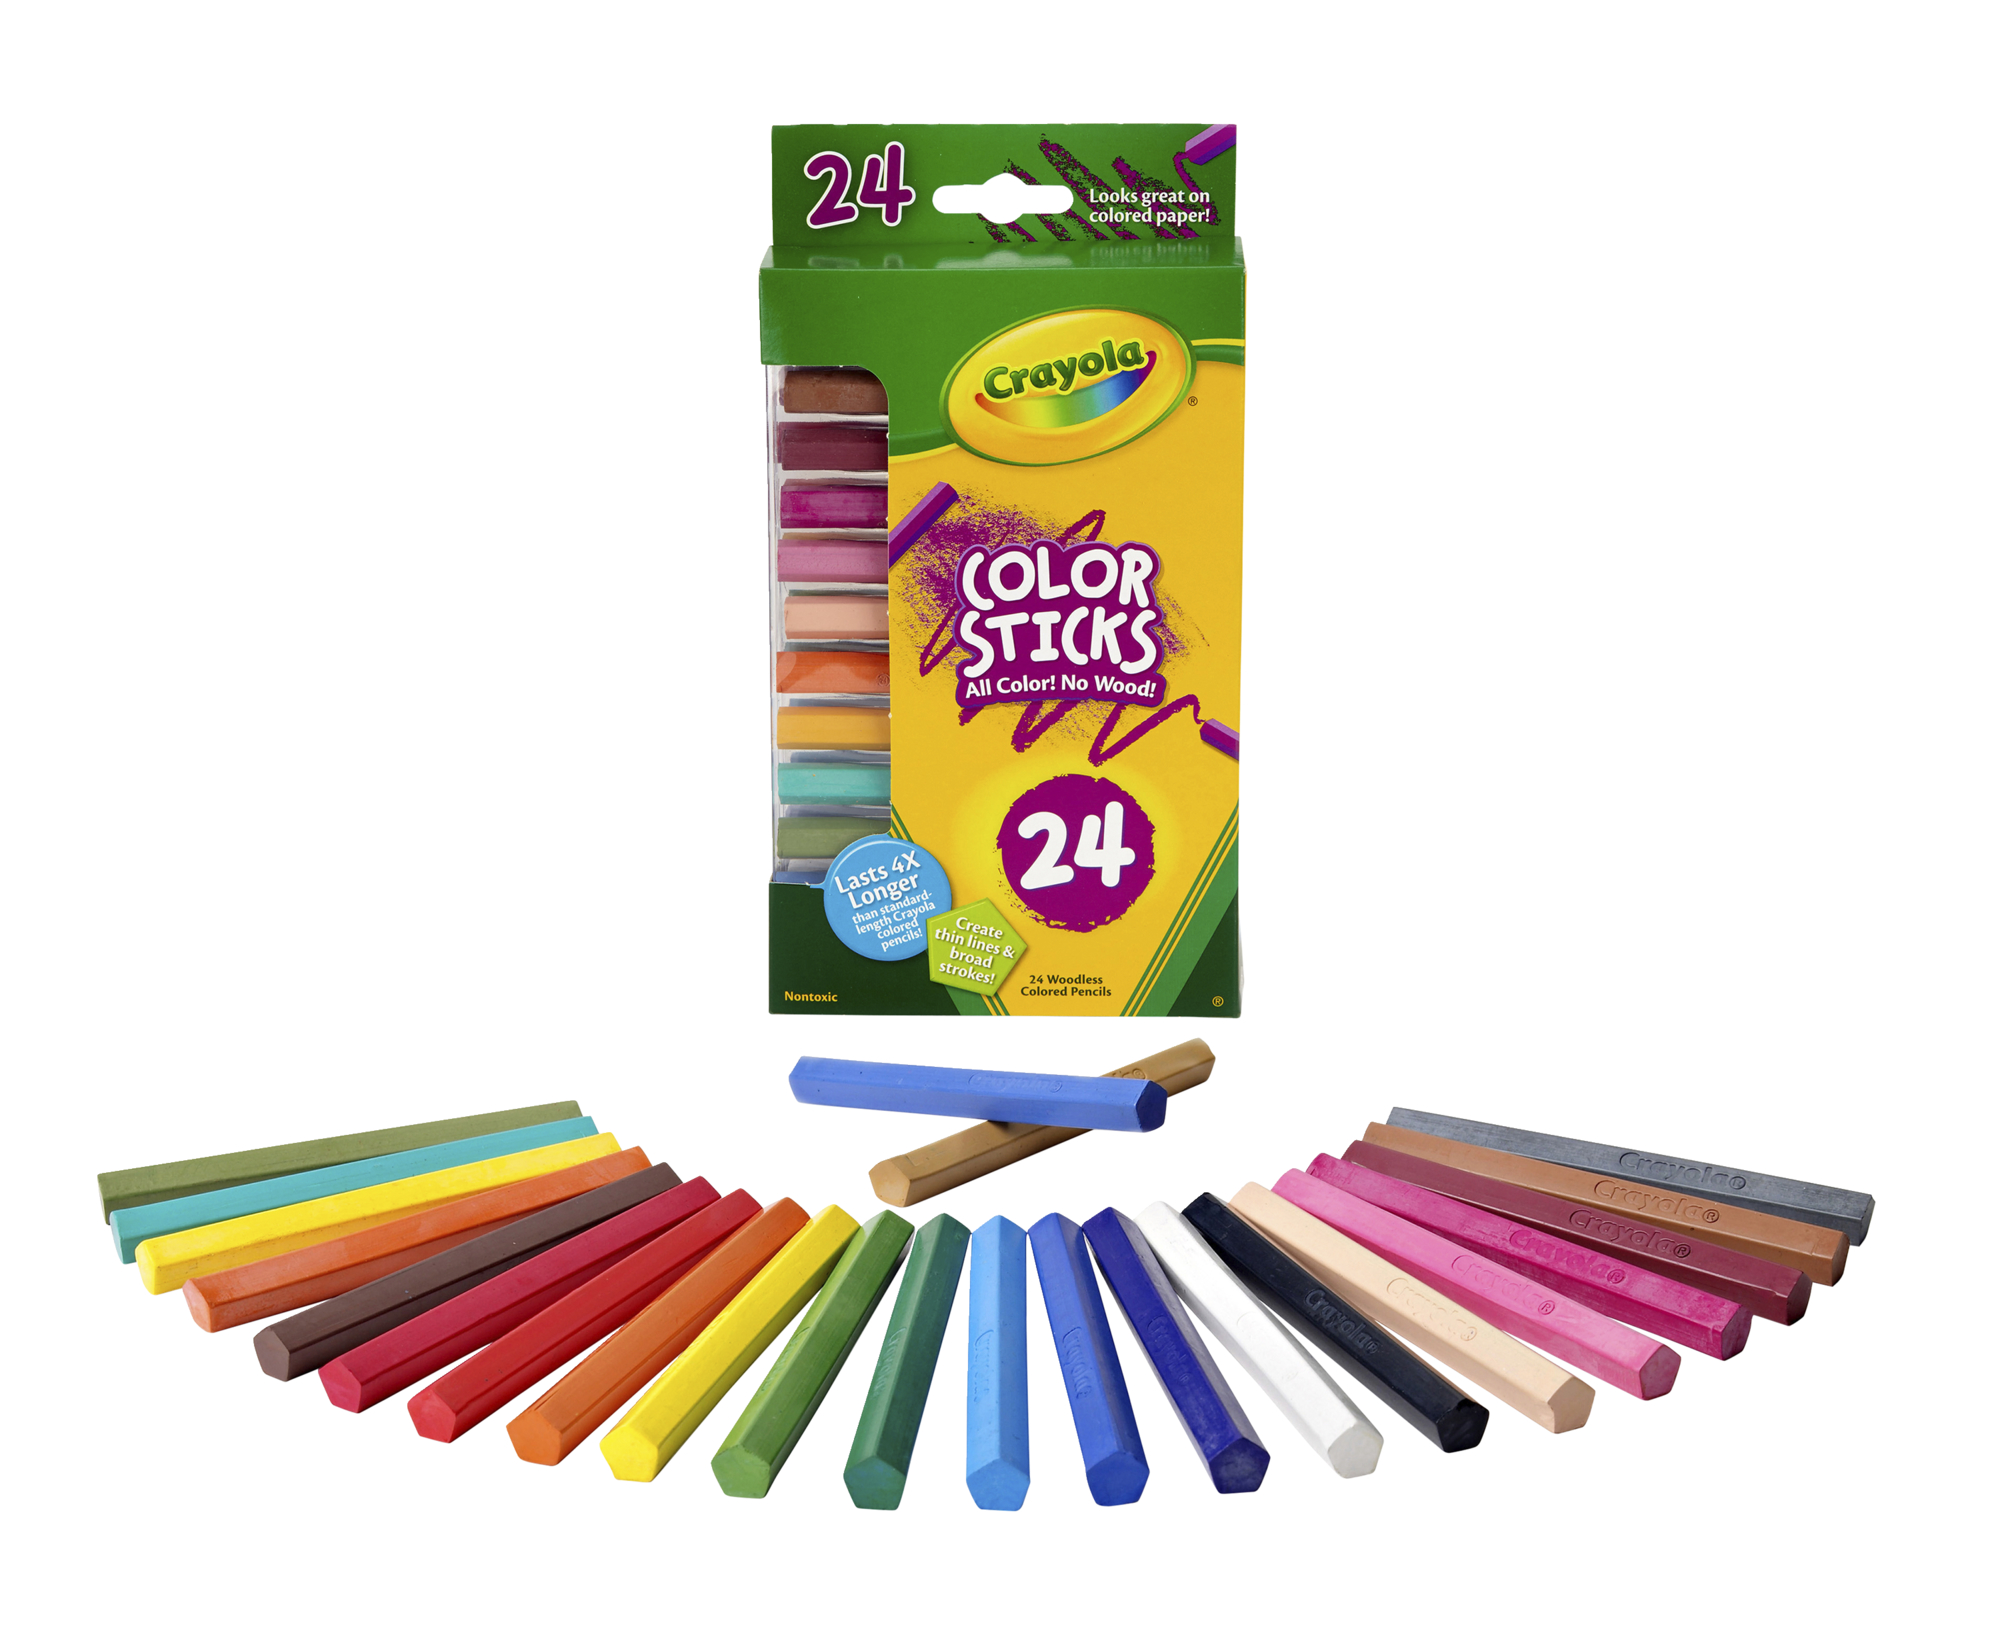 Crayola Color Sticks Woodless Pentagon Colored Pencils, Assorted Colors, Set of 24 - image 2 of 4